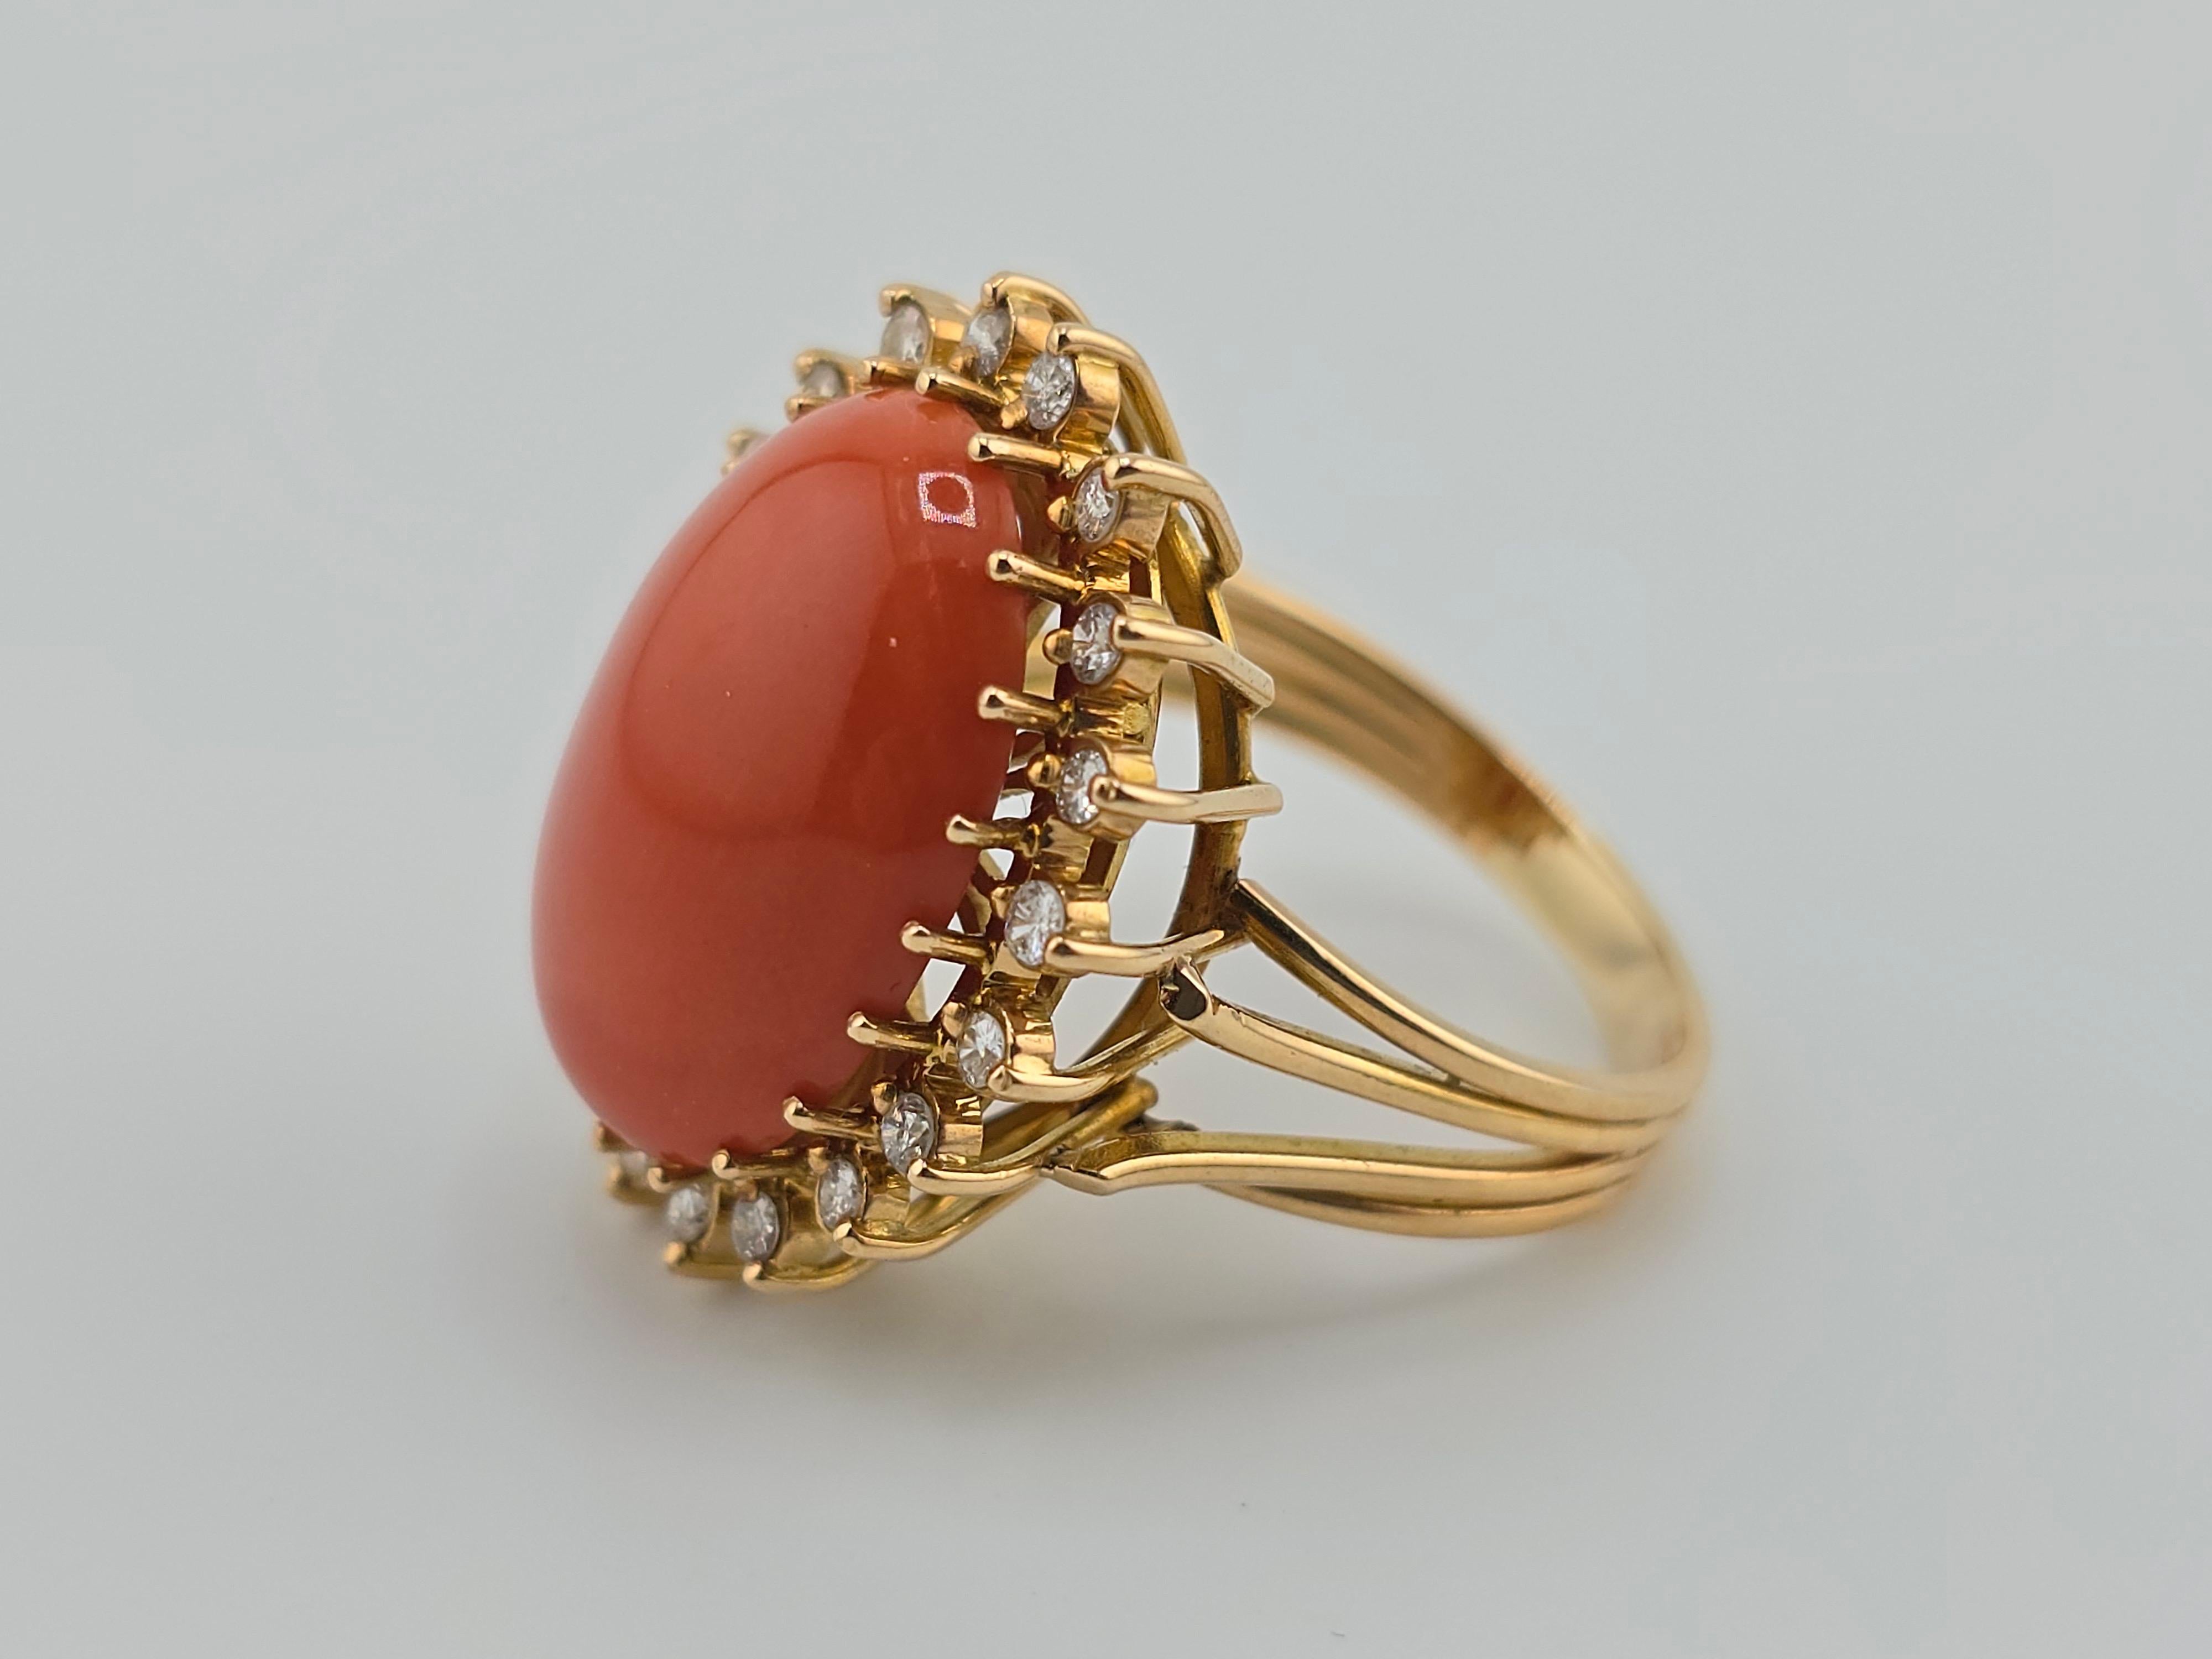 Marvelous Italian Momo Coral 14K Yellow Gold Ring Surrounded With Diamonds  For Sale 2